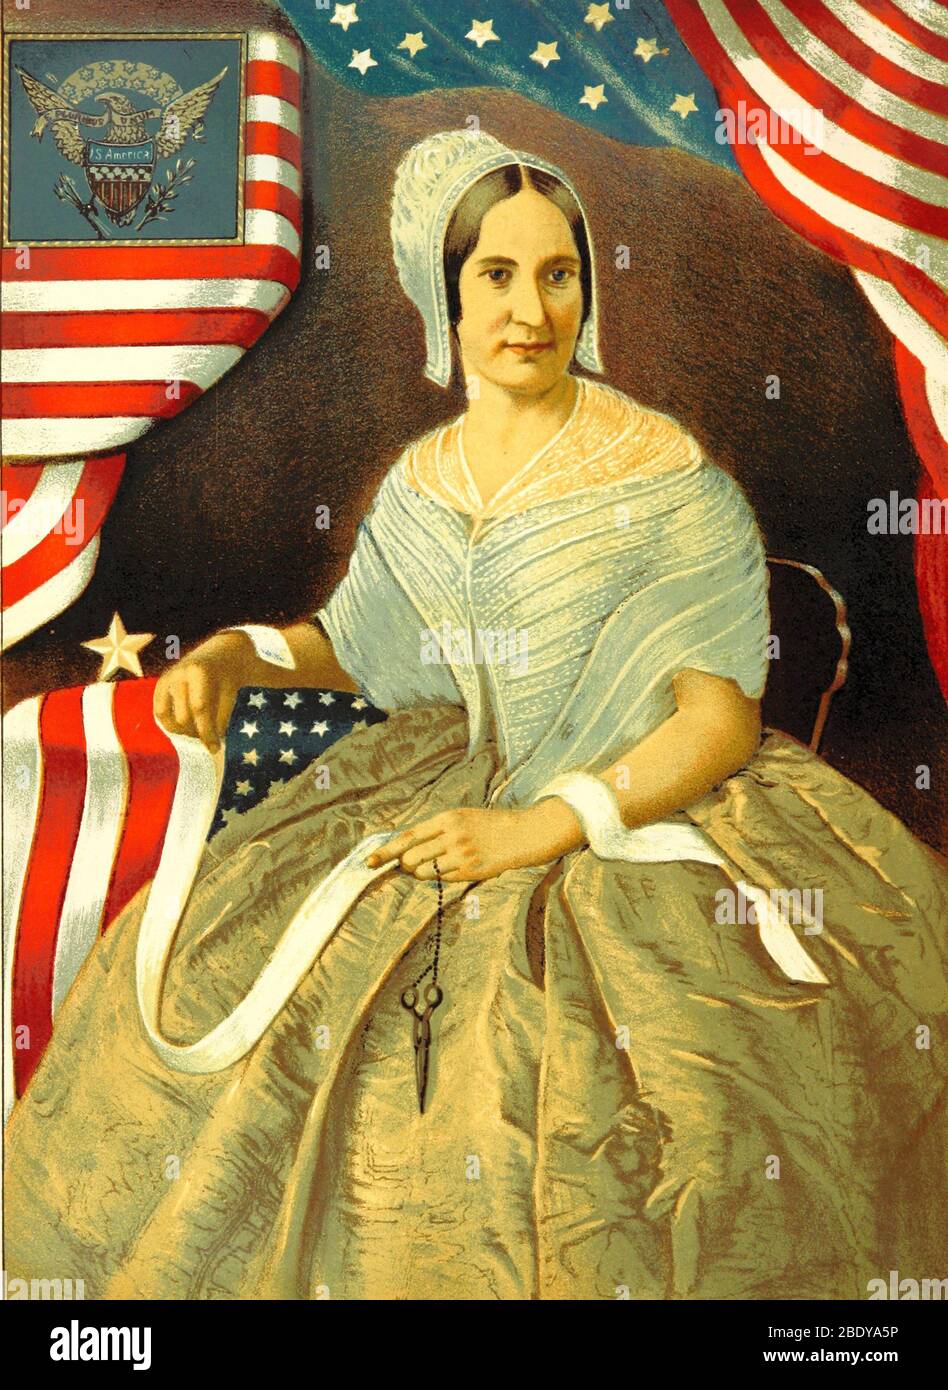 Betsy Ross, American Flag Design Contributor Stock Photo